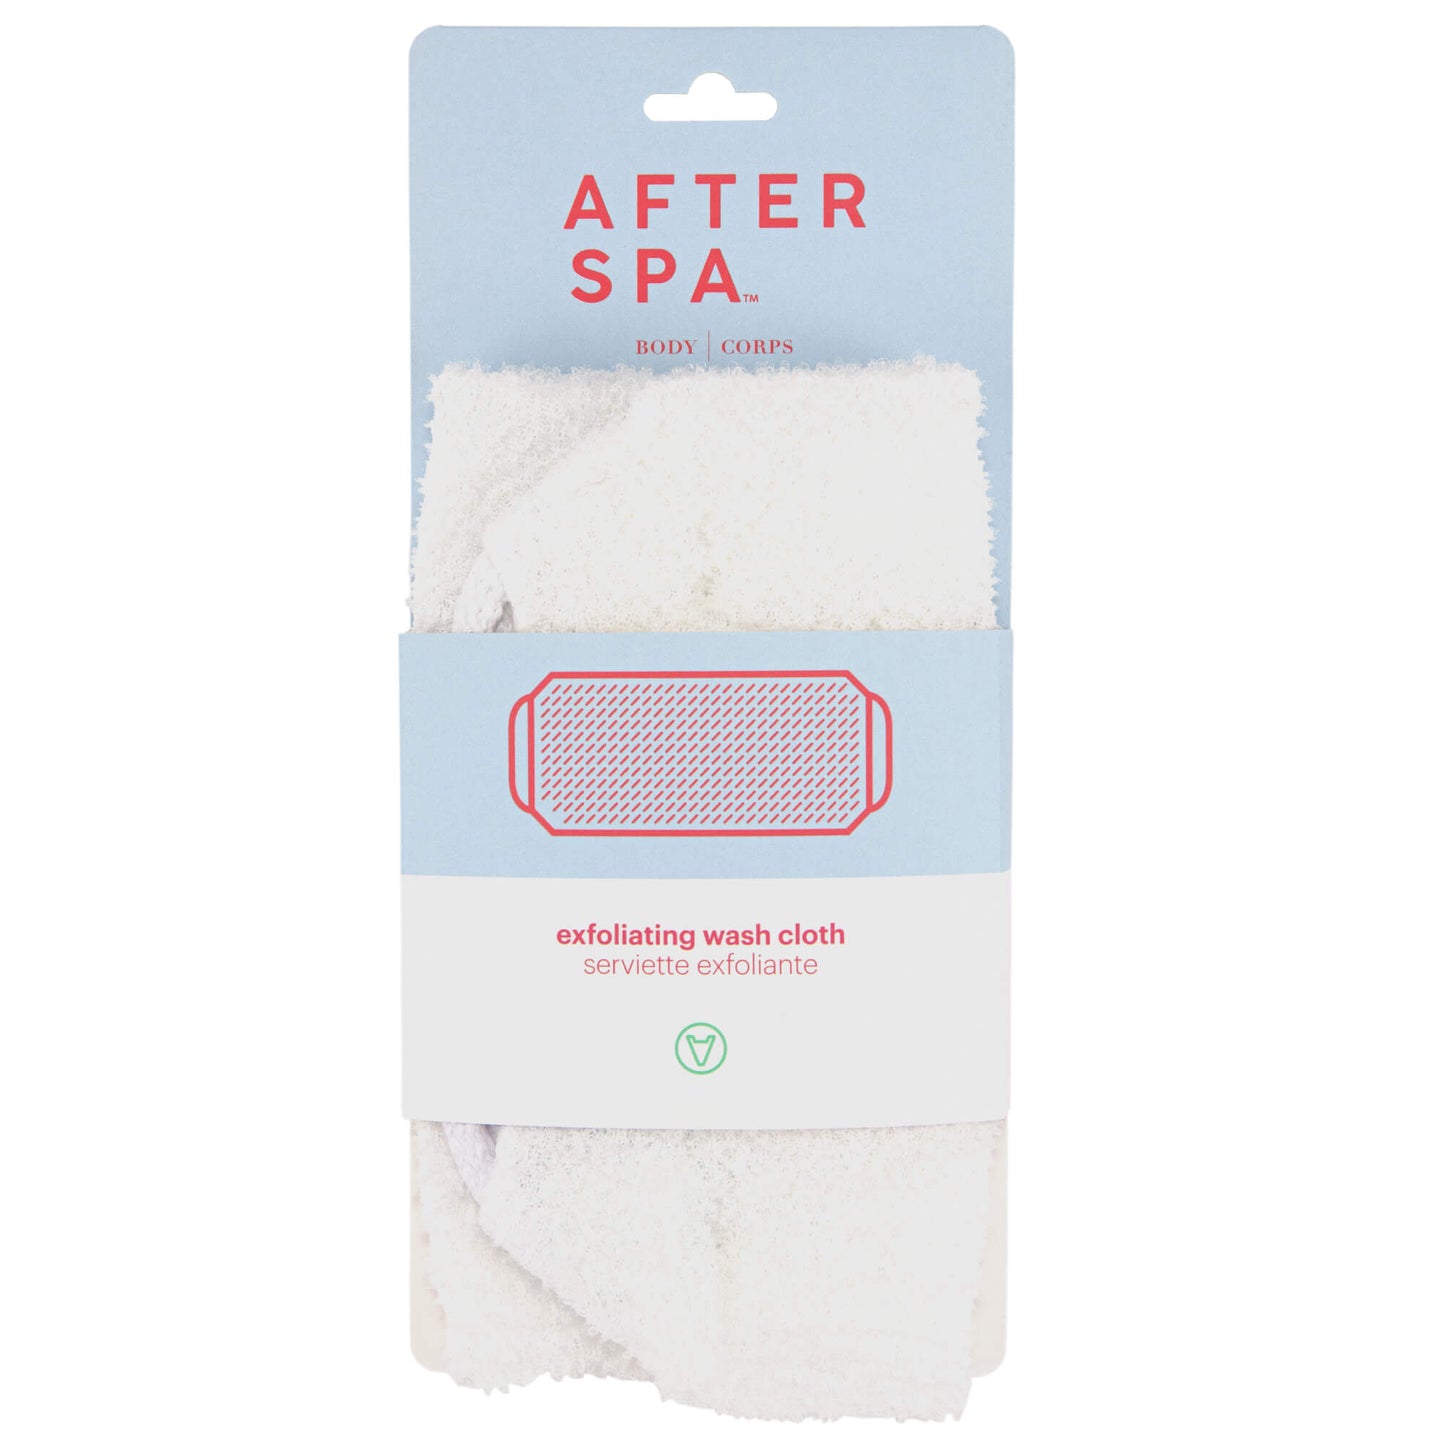 Exfoliating Wash Cloth by Afterspa to cleanse and exfoliate the bodyExfoliating Wash Cloth by Afterspa to cleanse and exfoliate the body